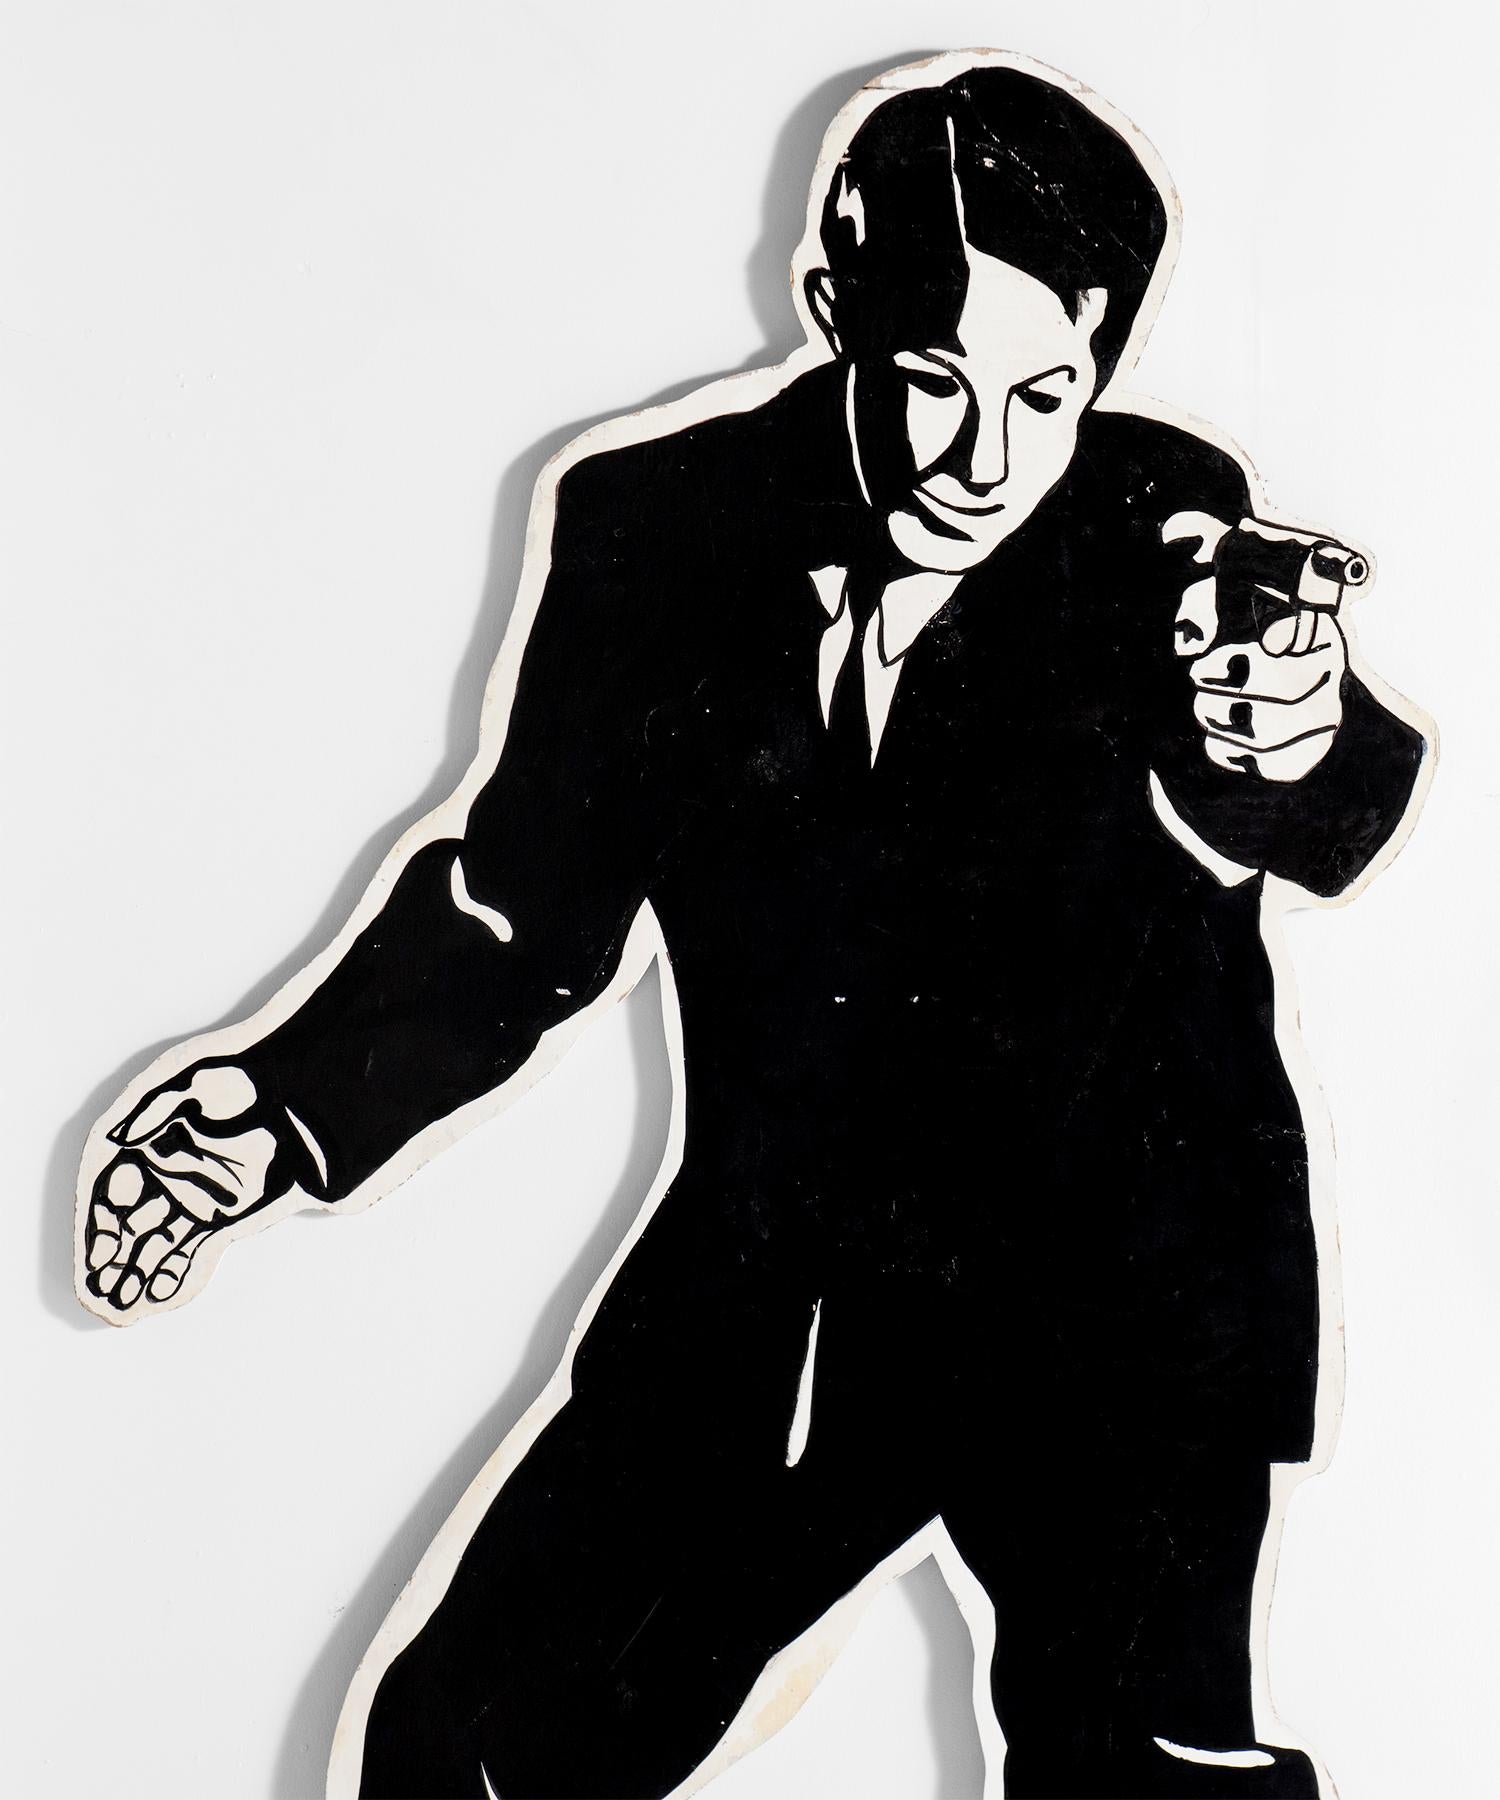 Painted plywood cutout of a secret agent.